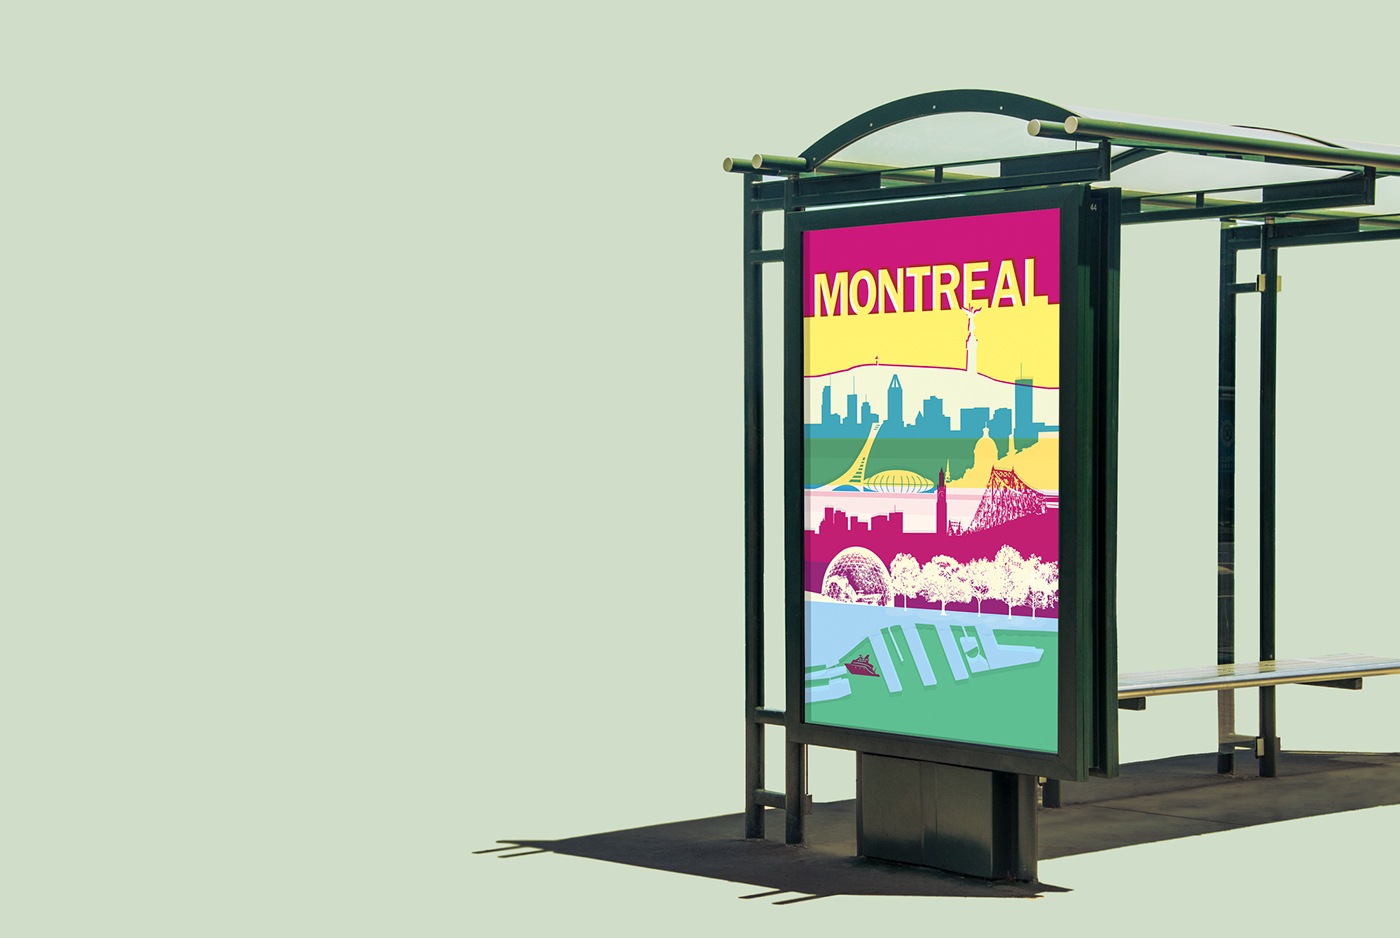 Montreal contest abribus skylines colors design ad bus shelter